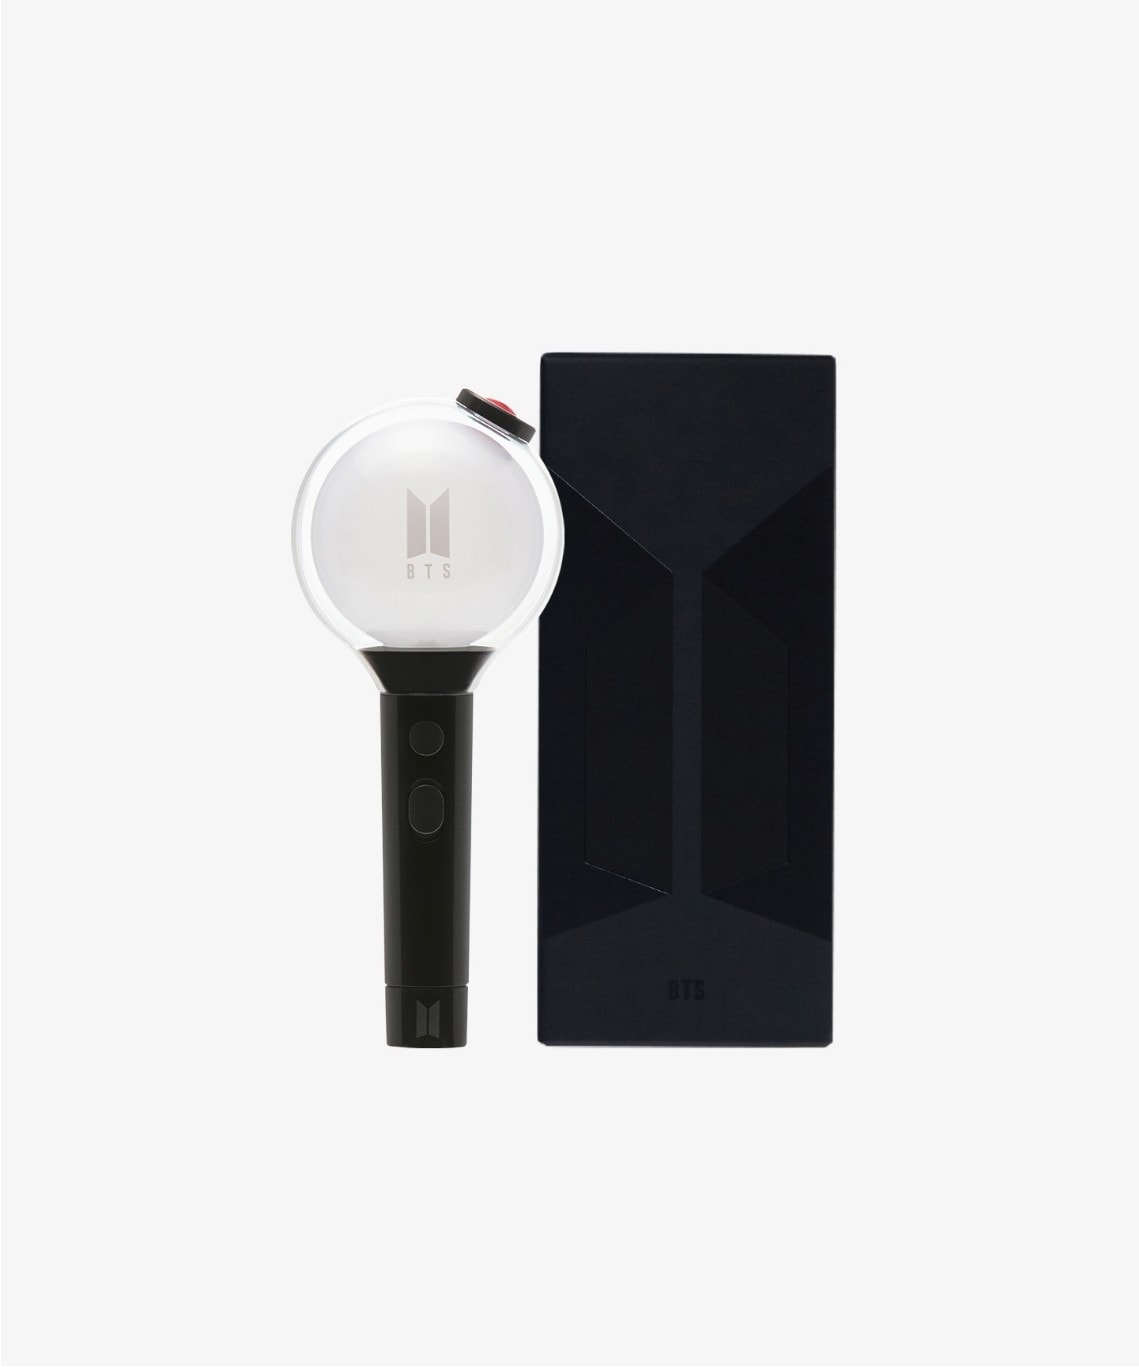 KPOP グッズ HYBEBTS Official Light Stick [MAP OF THE SOUL SPECIAL EDITION]